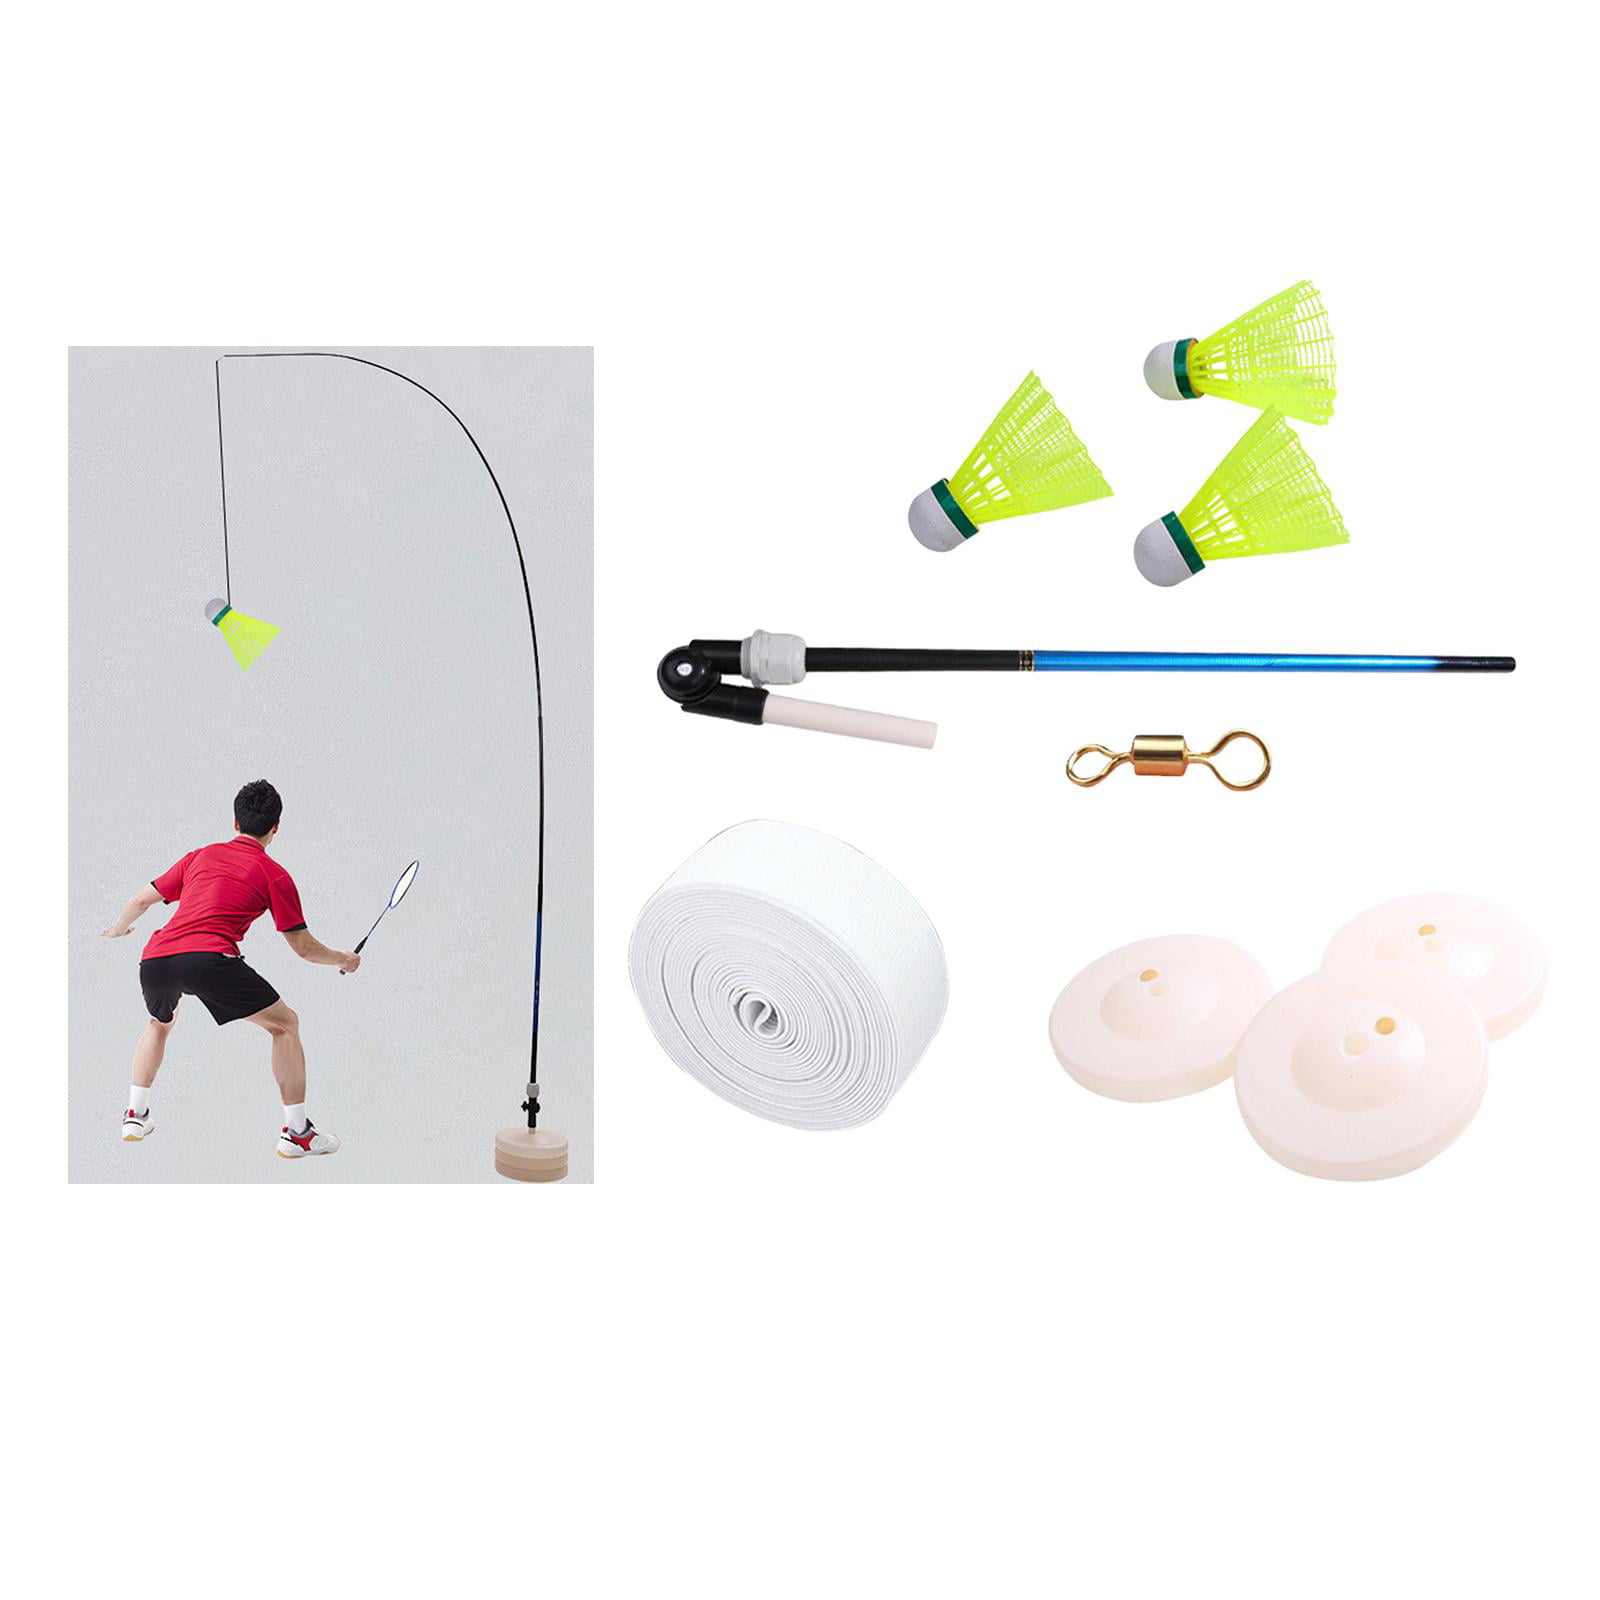 DYNWAVE Portable Badminton Self Training Device Single Practice Badminton Trainer Kids Adults High Elastic Exercising with Balls 